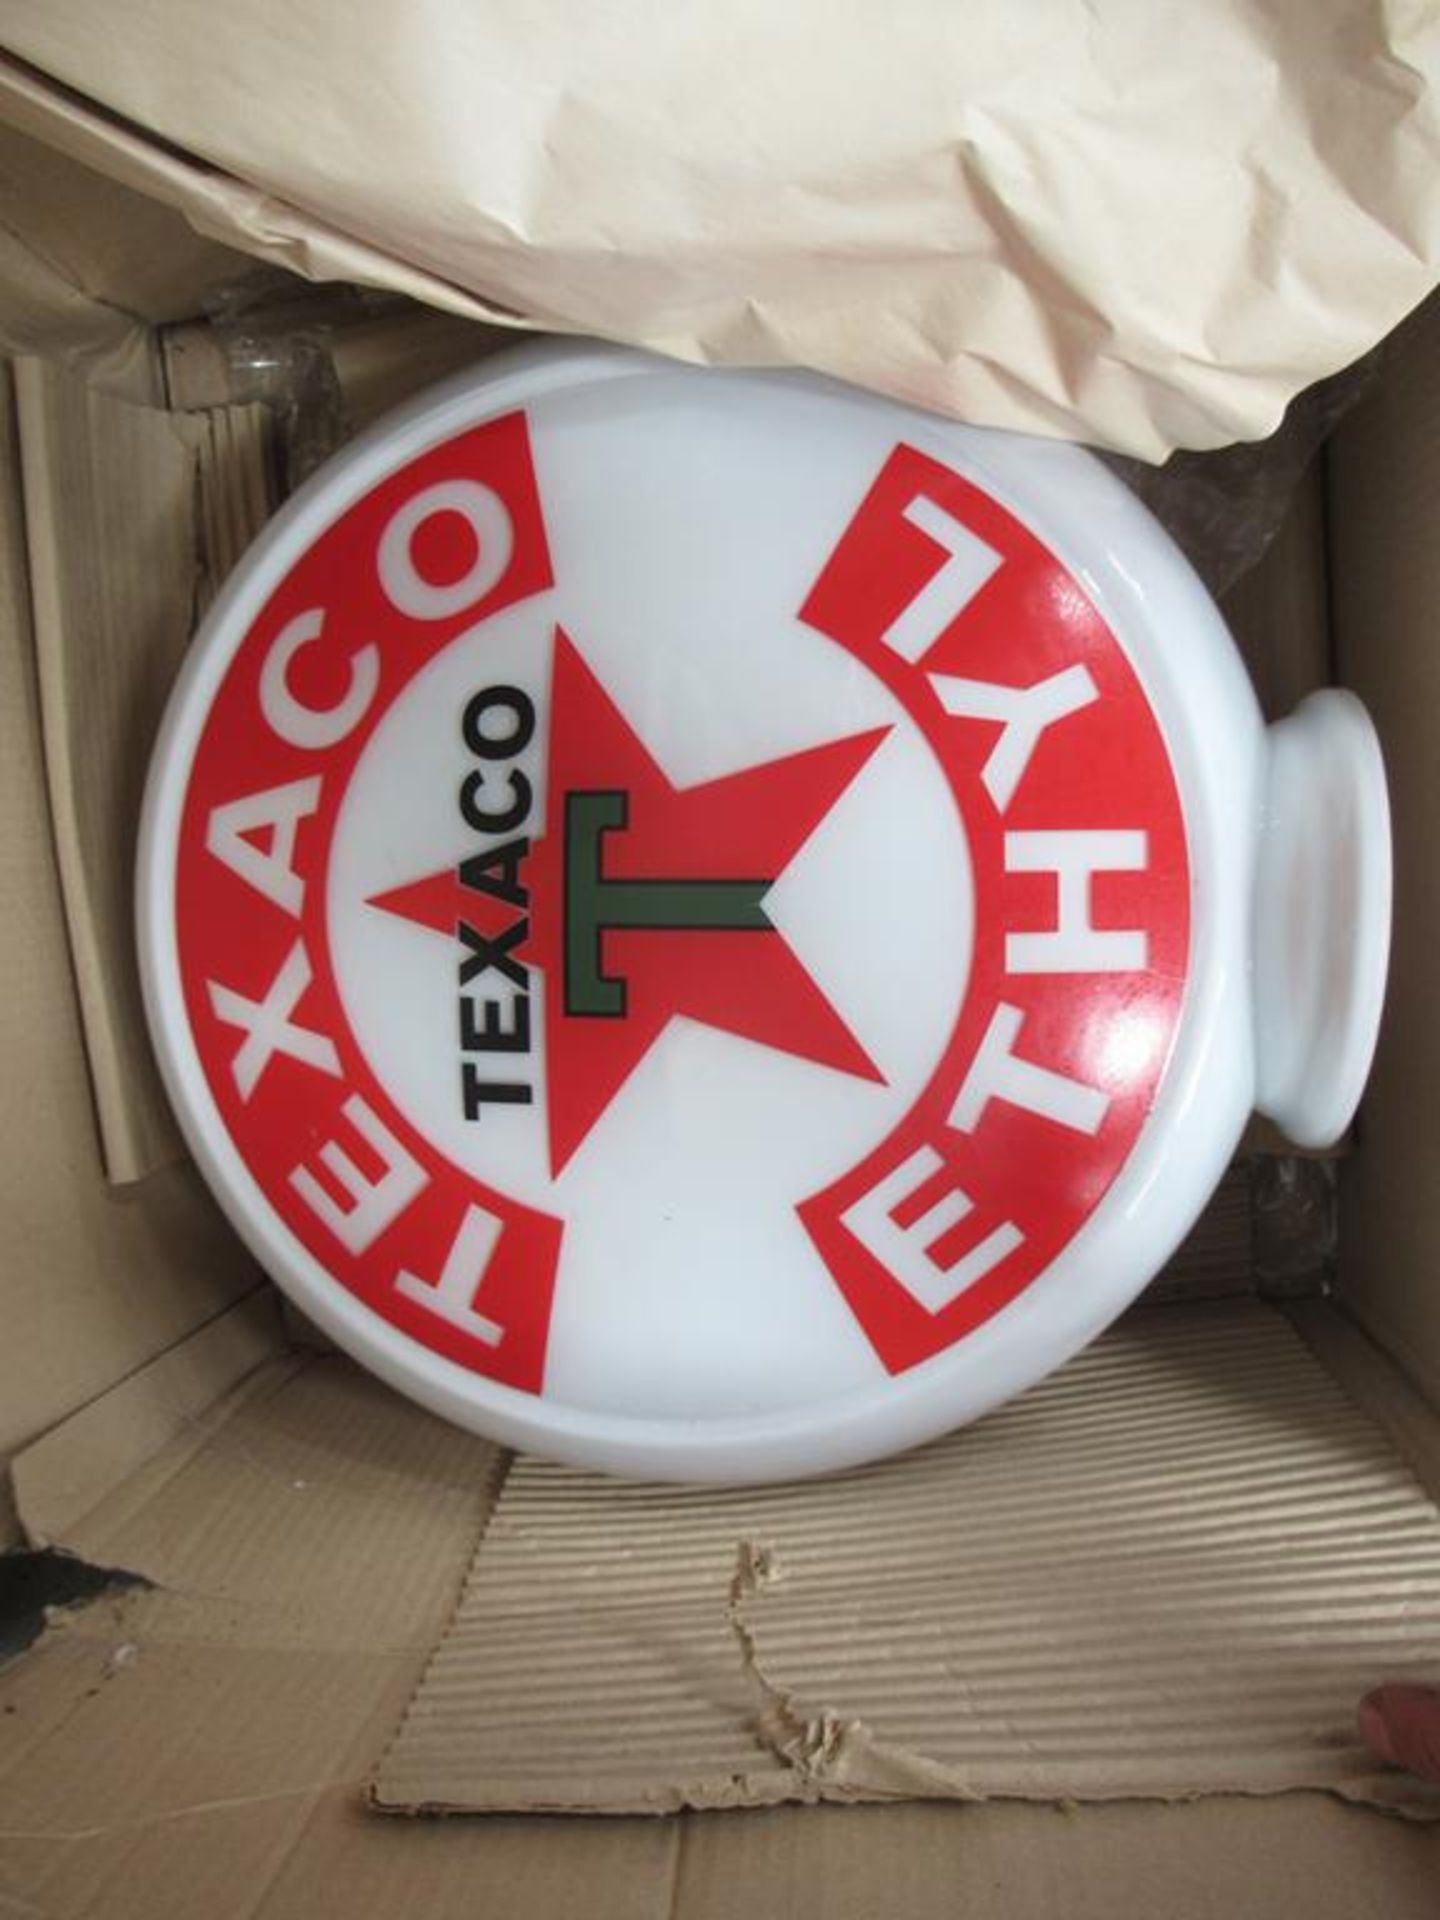 Texaco Ethyl Glass Fuel Pump advertising Globe (possibly reproduction)